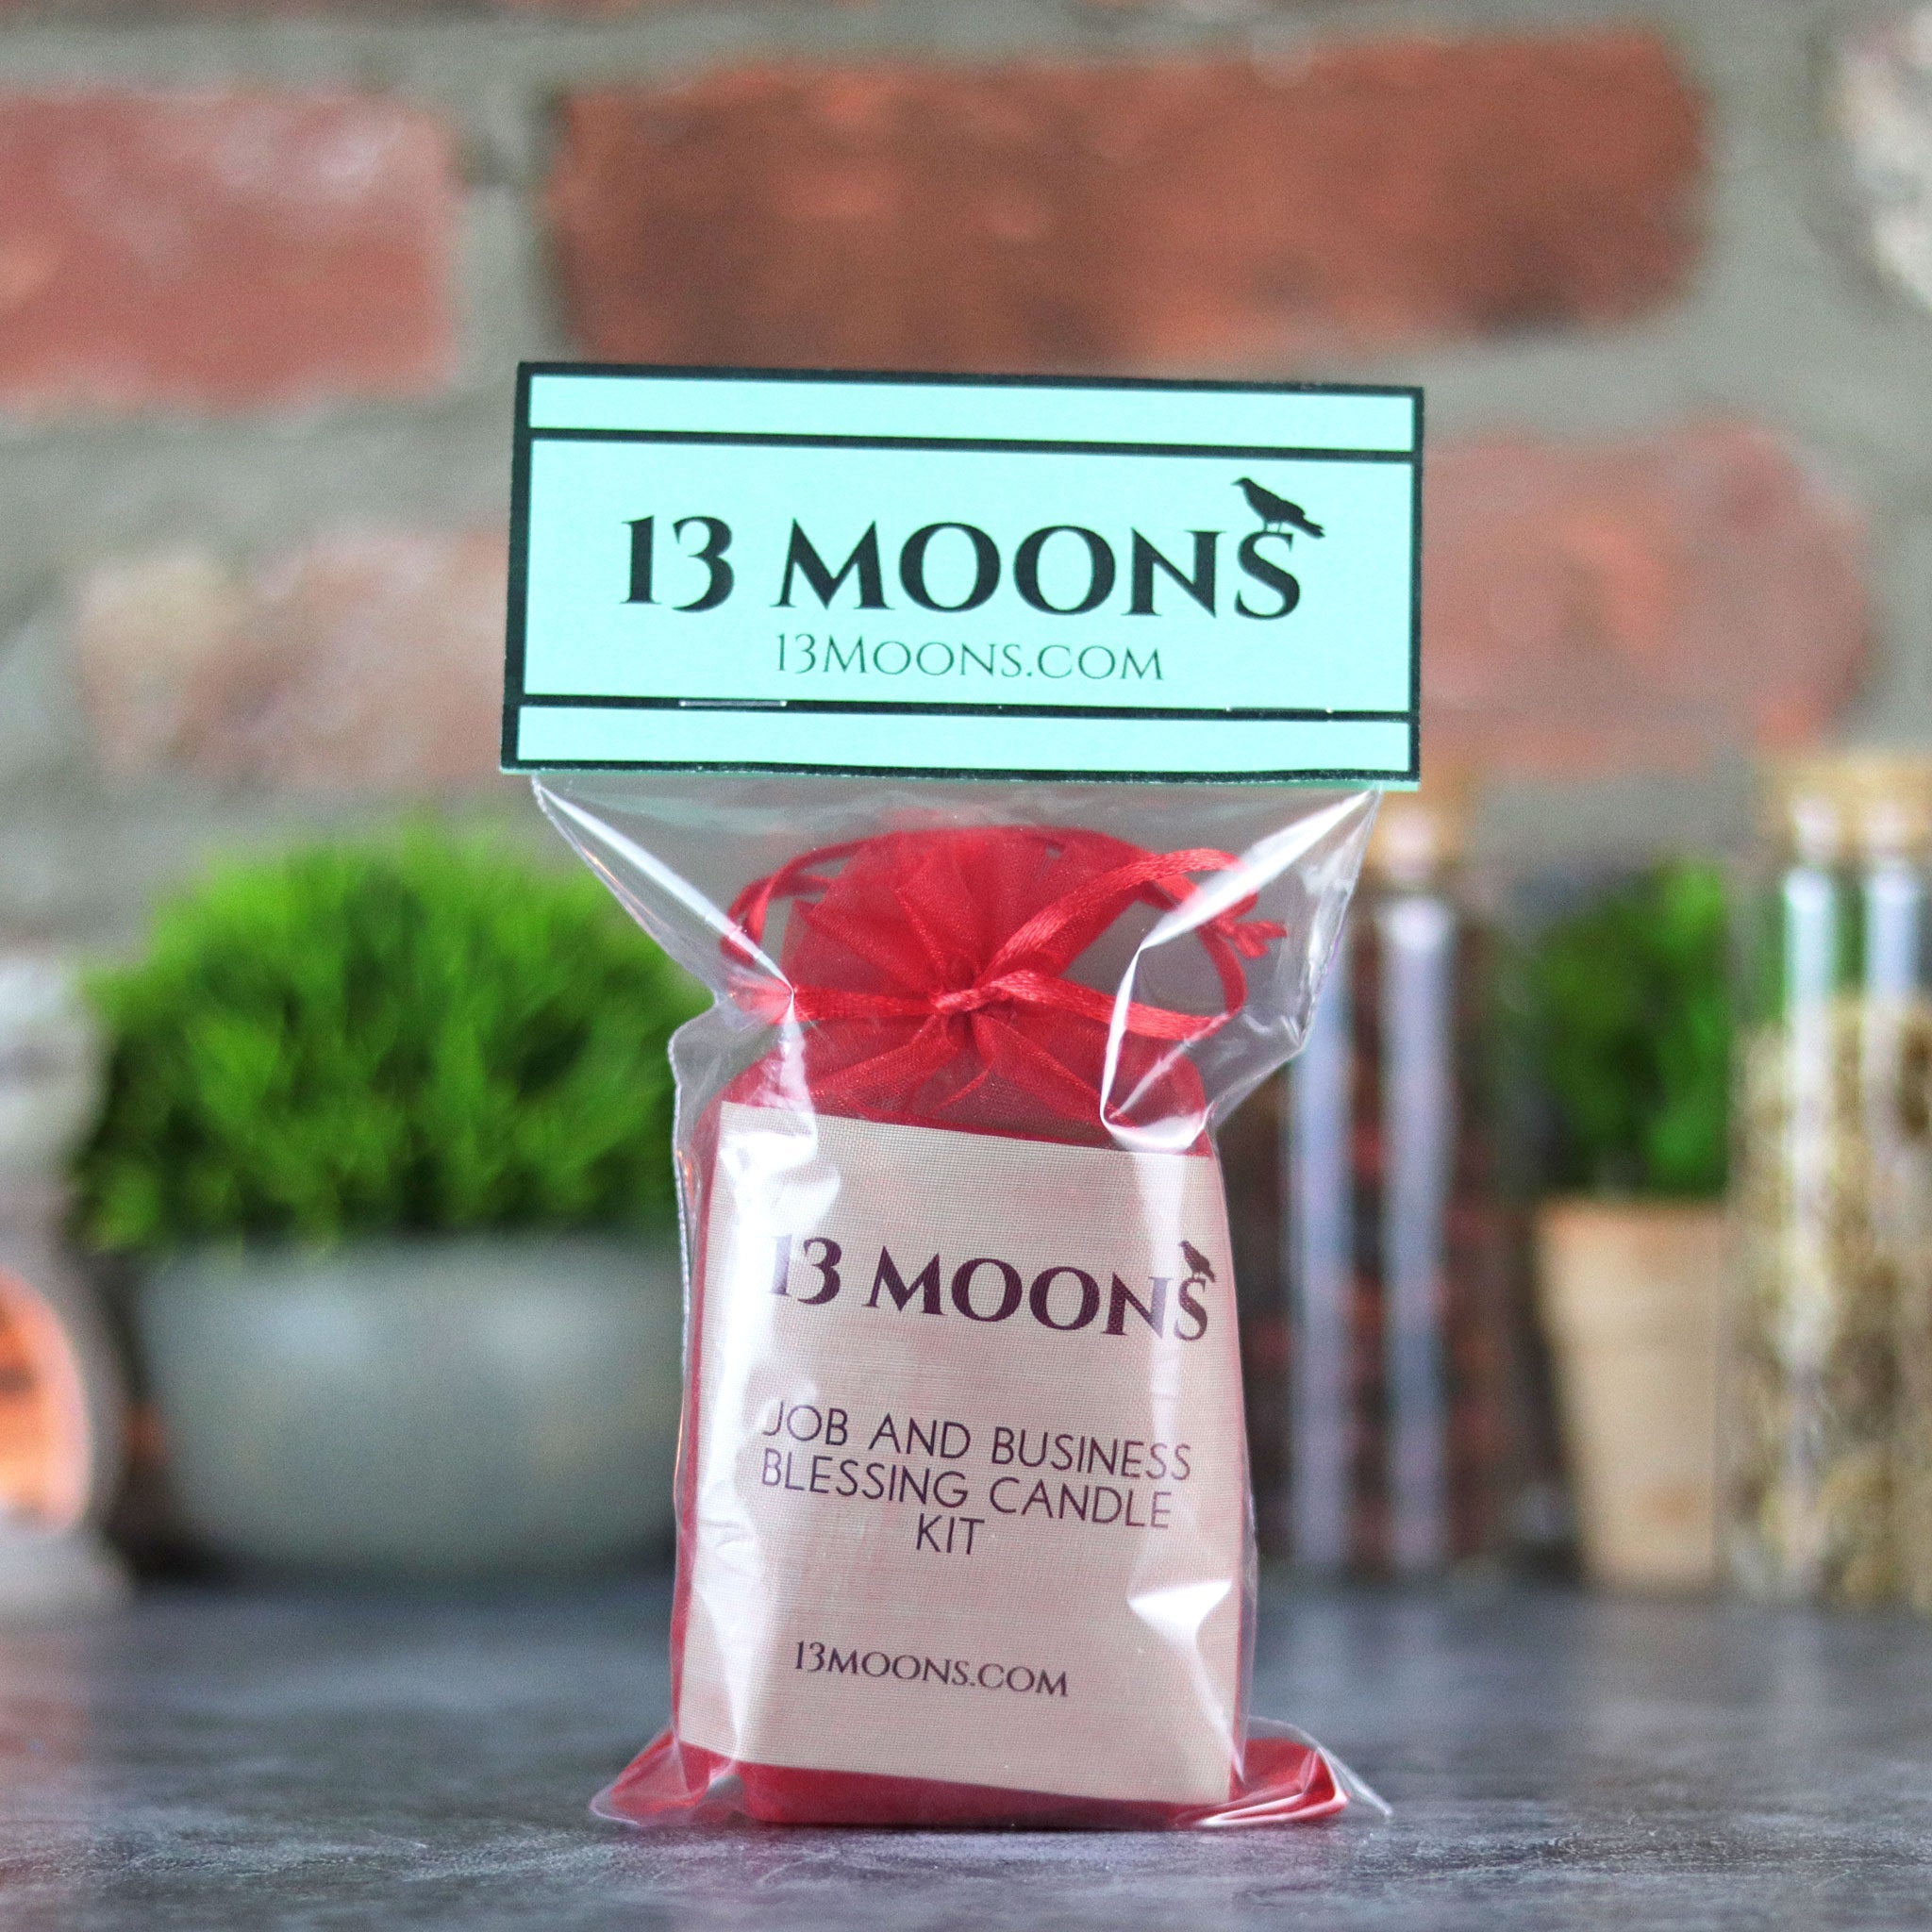 Job and Business Blessing Candle Kit - 13 Moons